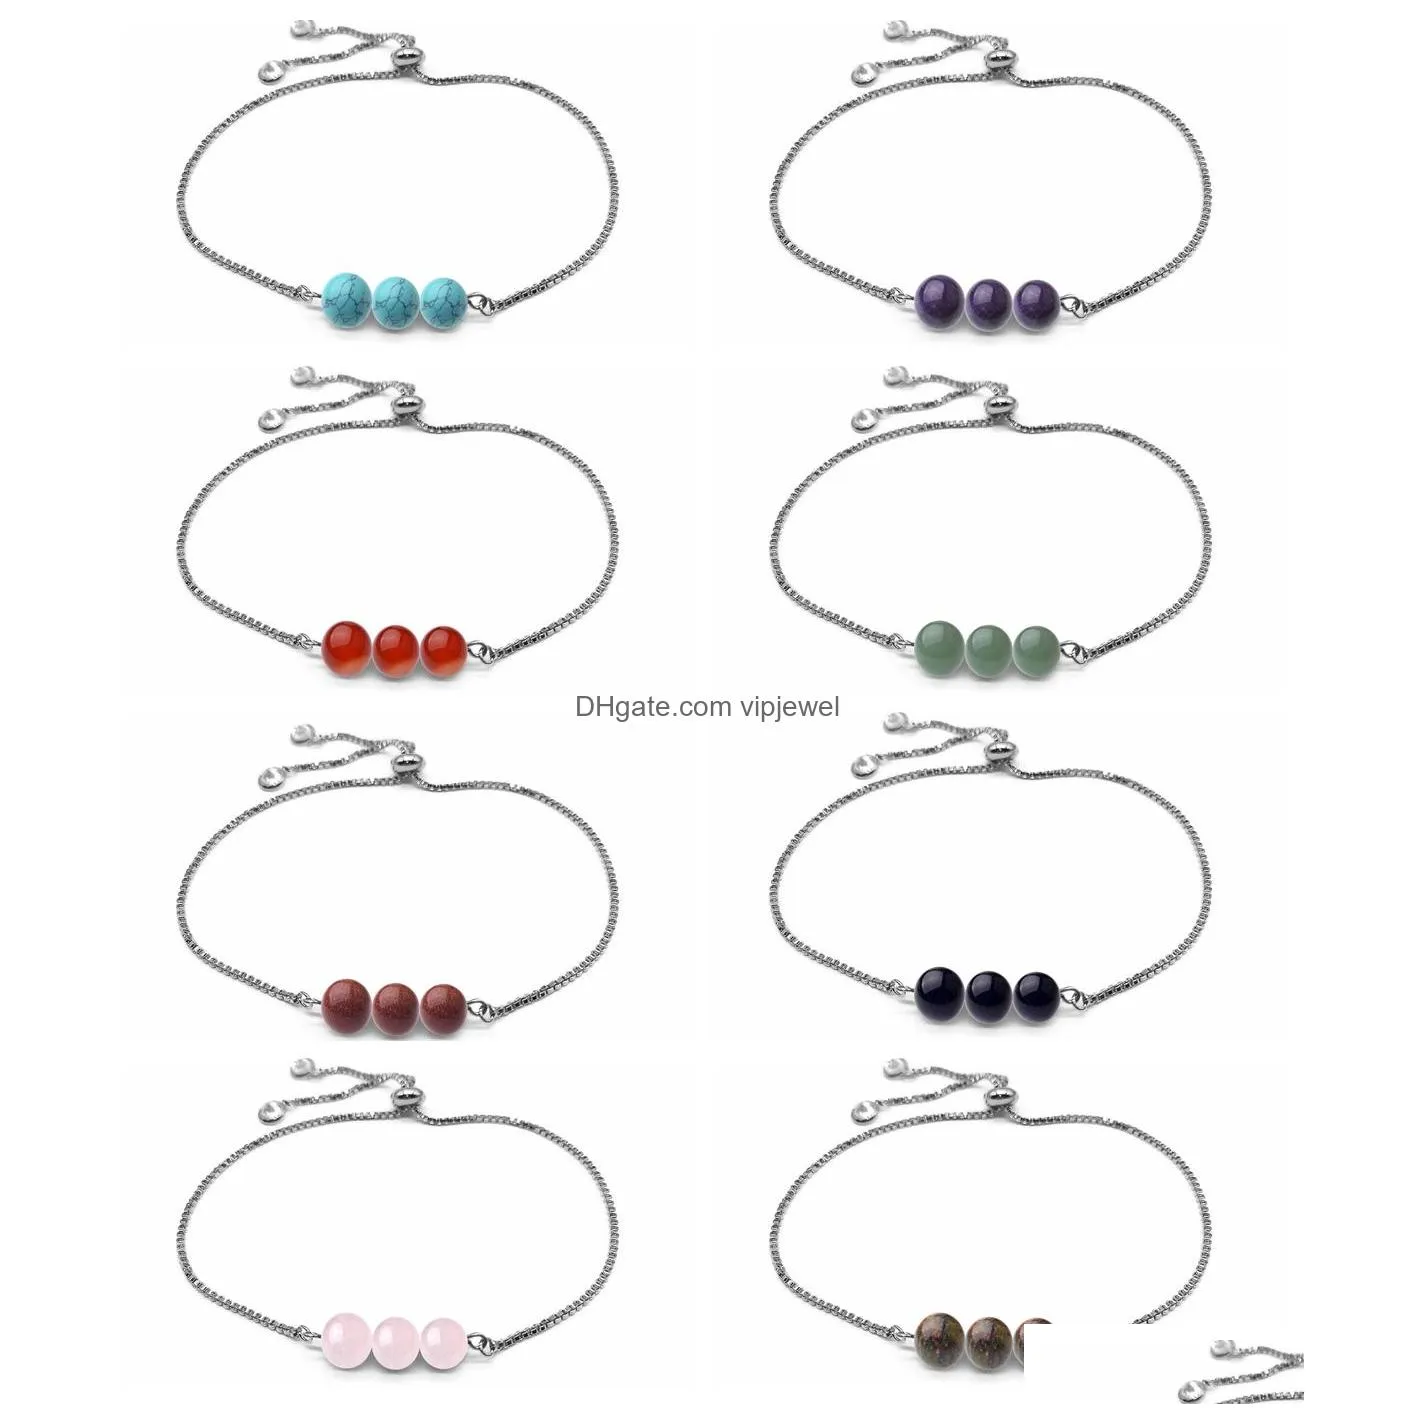 silver chain healing crystal beaded bracelet wristbands 3pcs 8mm stone beads chakra gemstone cuff bangle anklet jewelry adjustable for men women teen